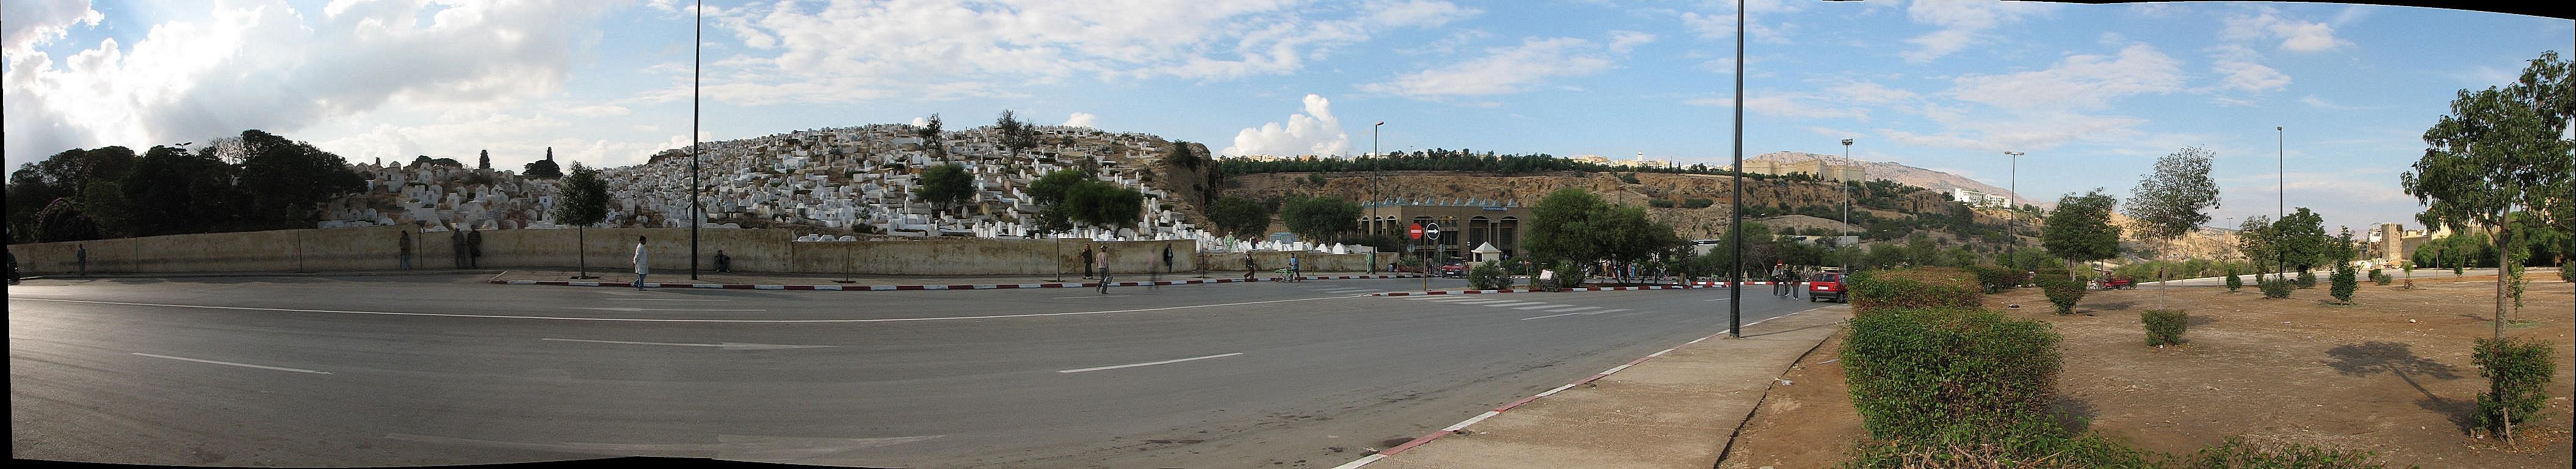 Fes cemetary